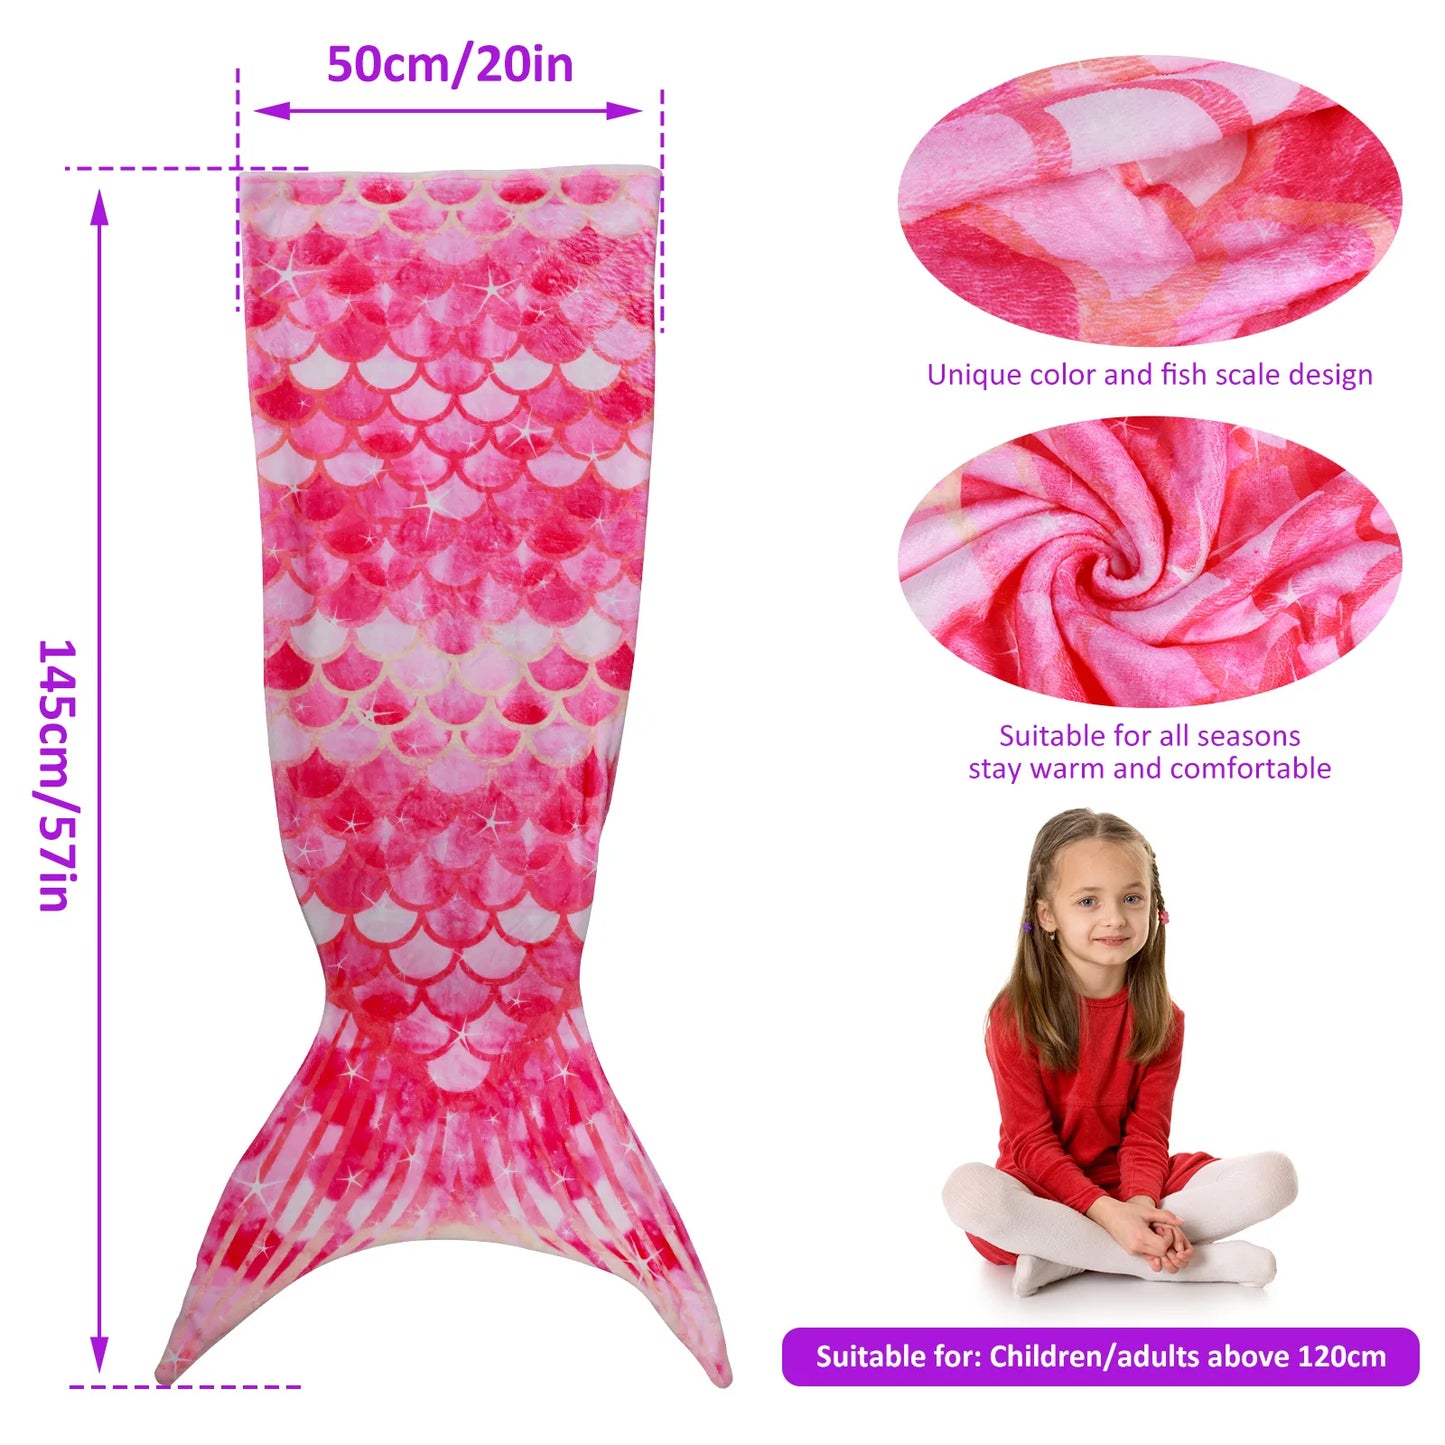 Mermaid Tail Blanket Ultra-Soft Flannel Sleeping Blanket Fish Scale Pattern Bag Comfortable Tail Snuggle Cute Child